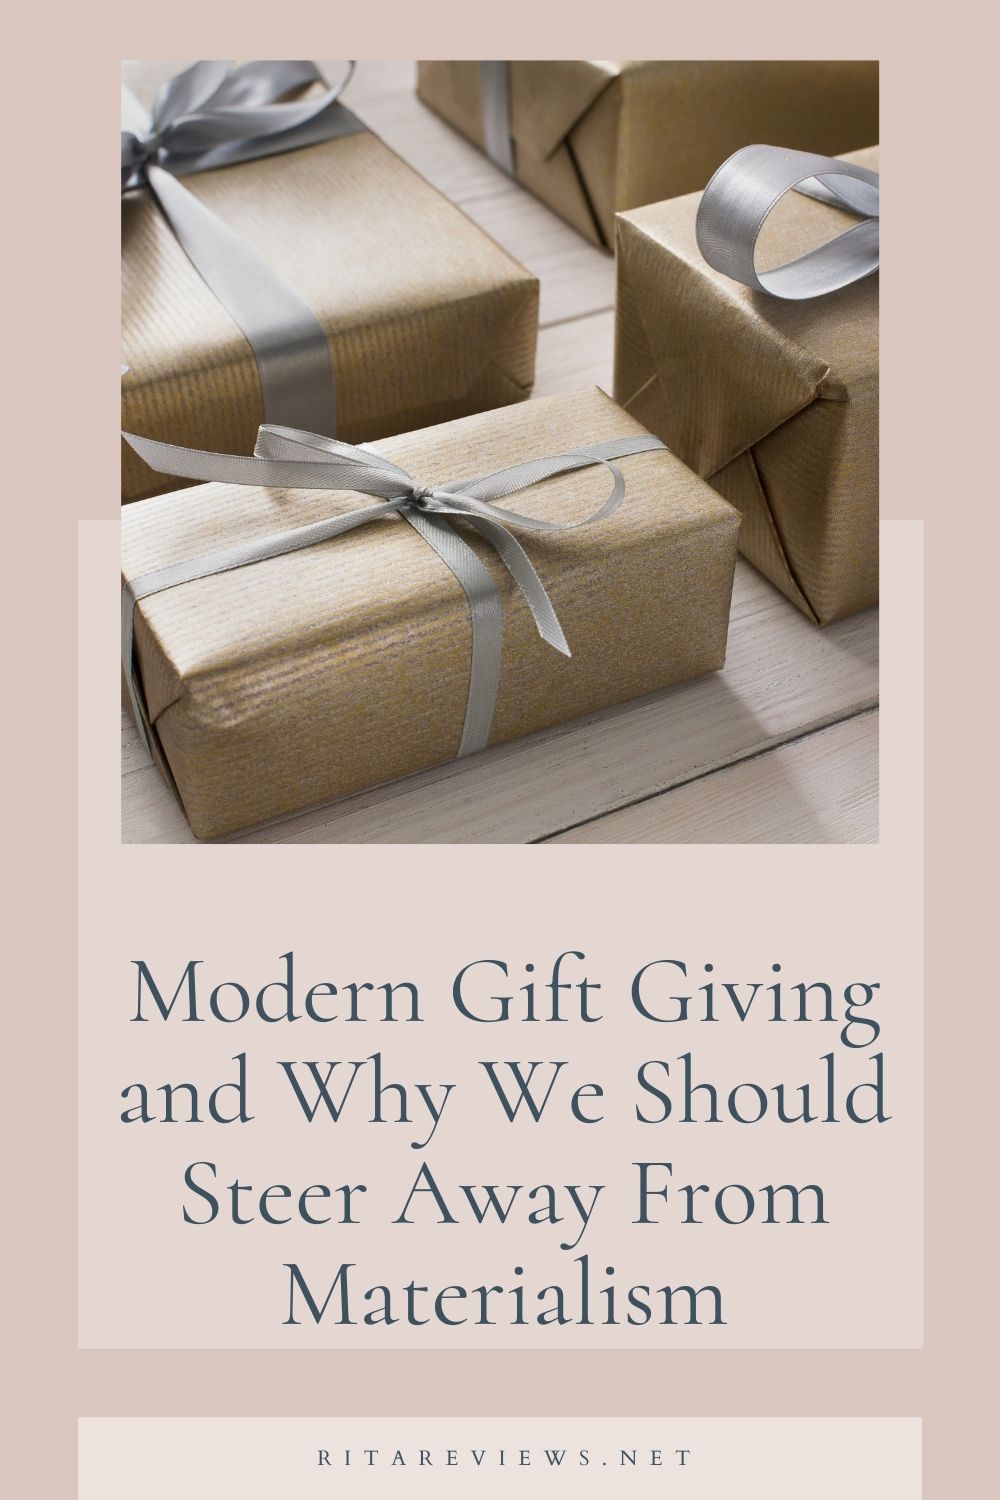 Modern Gift Giving and Why We Should Steer Away From Materialism